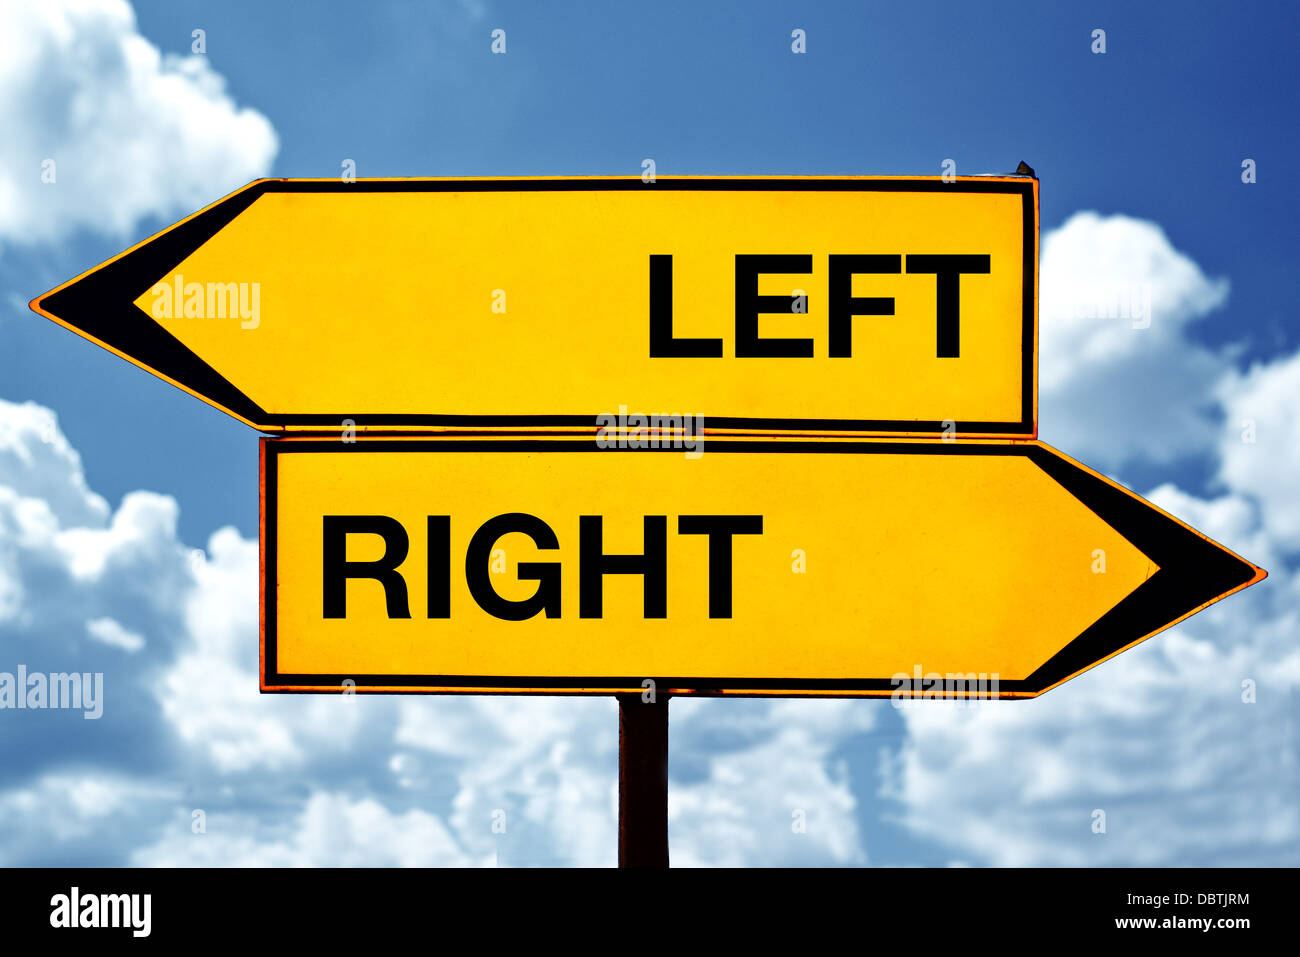 Left or right, opposite signs. Two opposite signs against blue sky background. Stock Photo